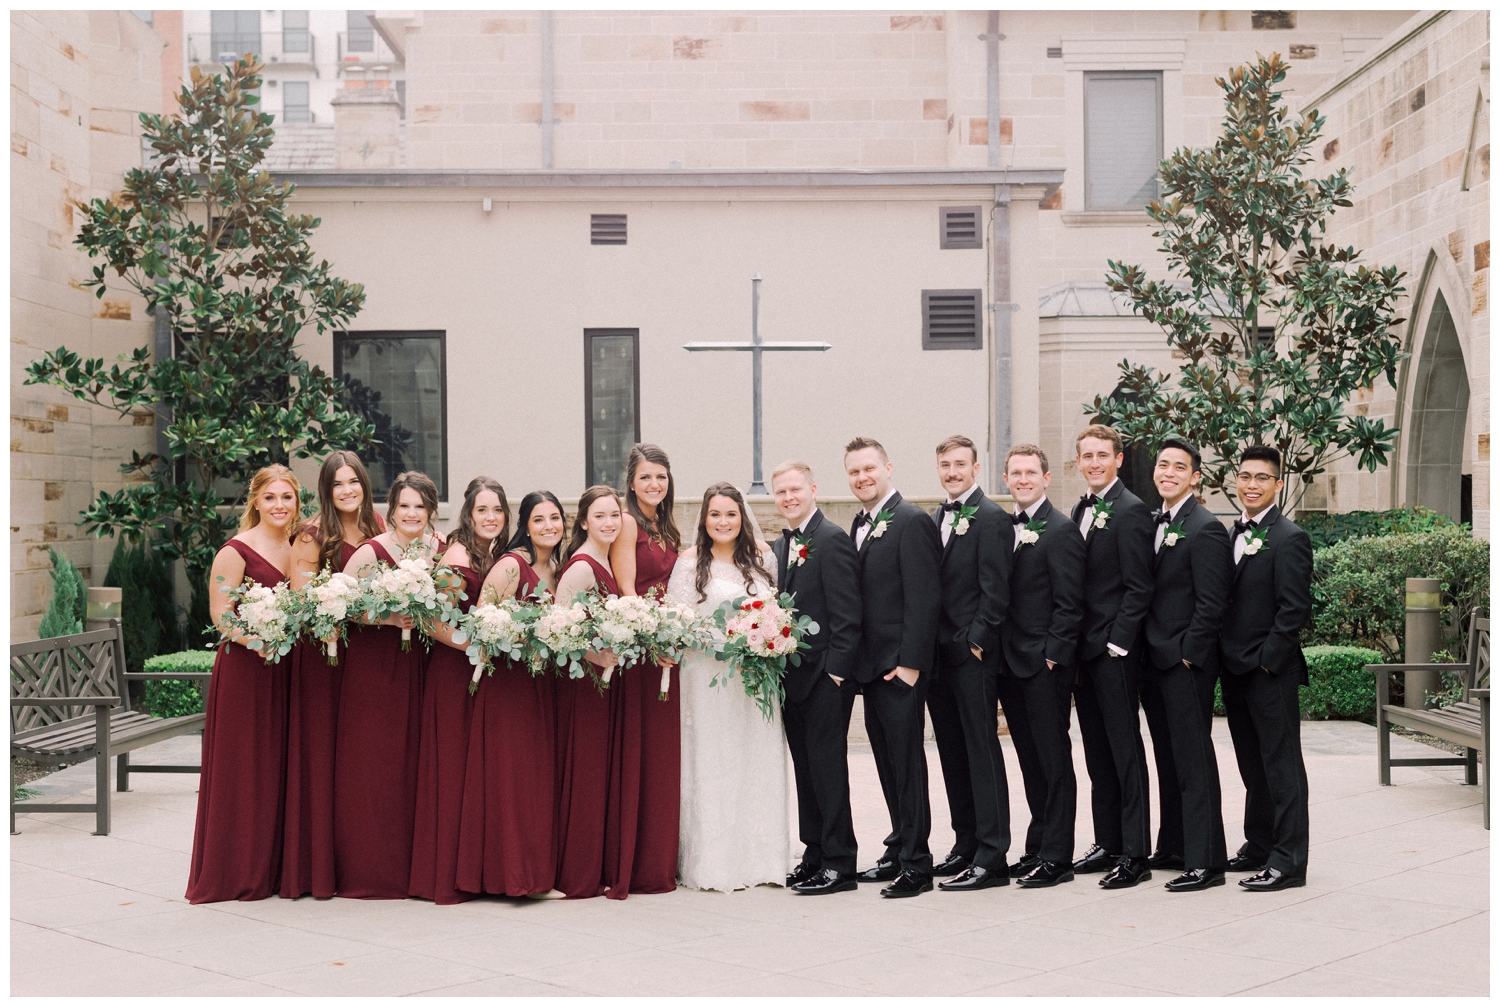 bridal party portrait in wine dresses and black tuxes at Holy Rosary Church